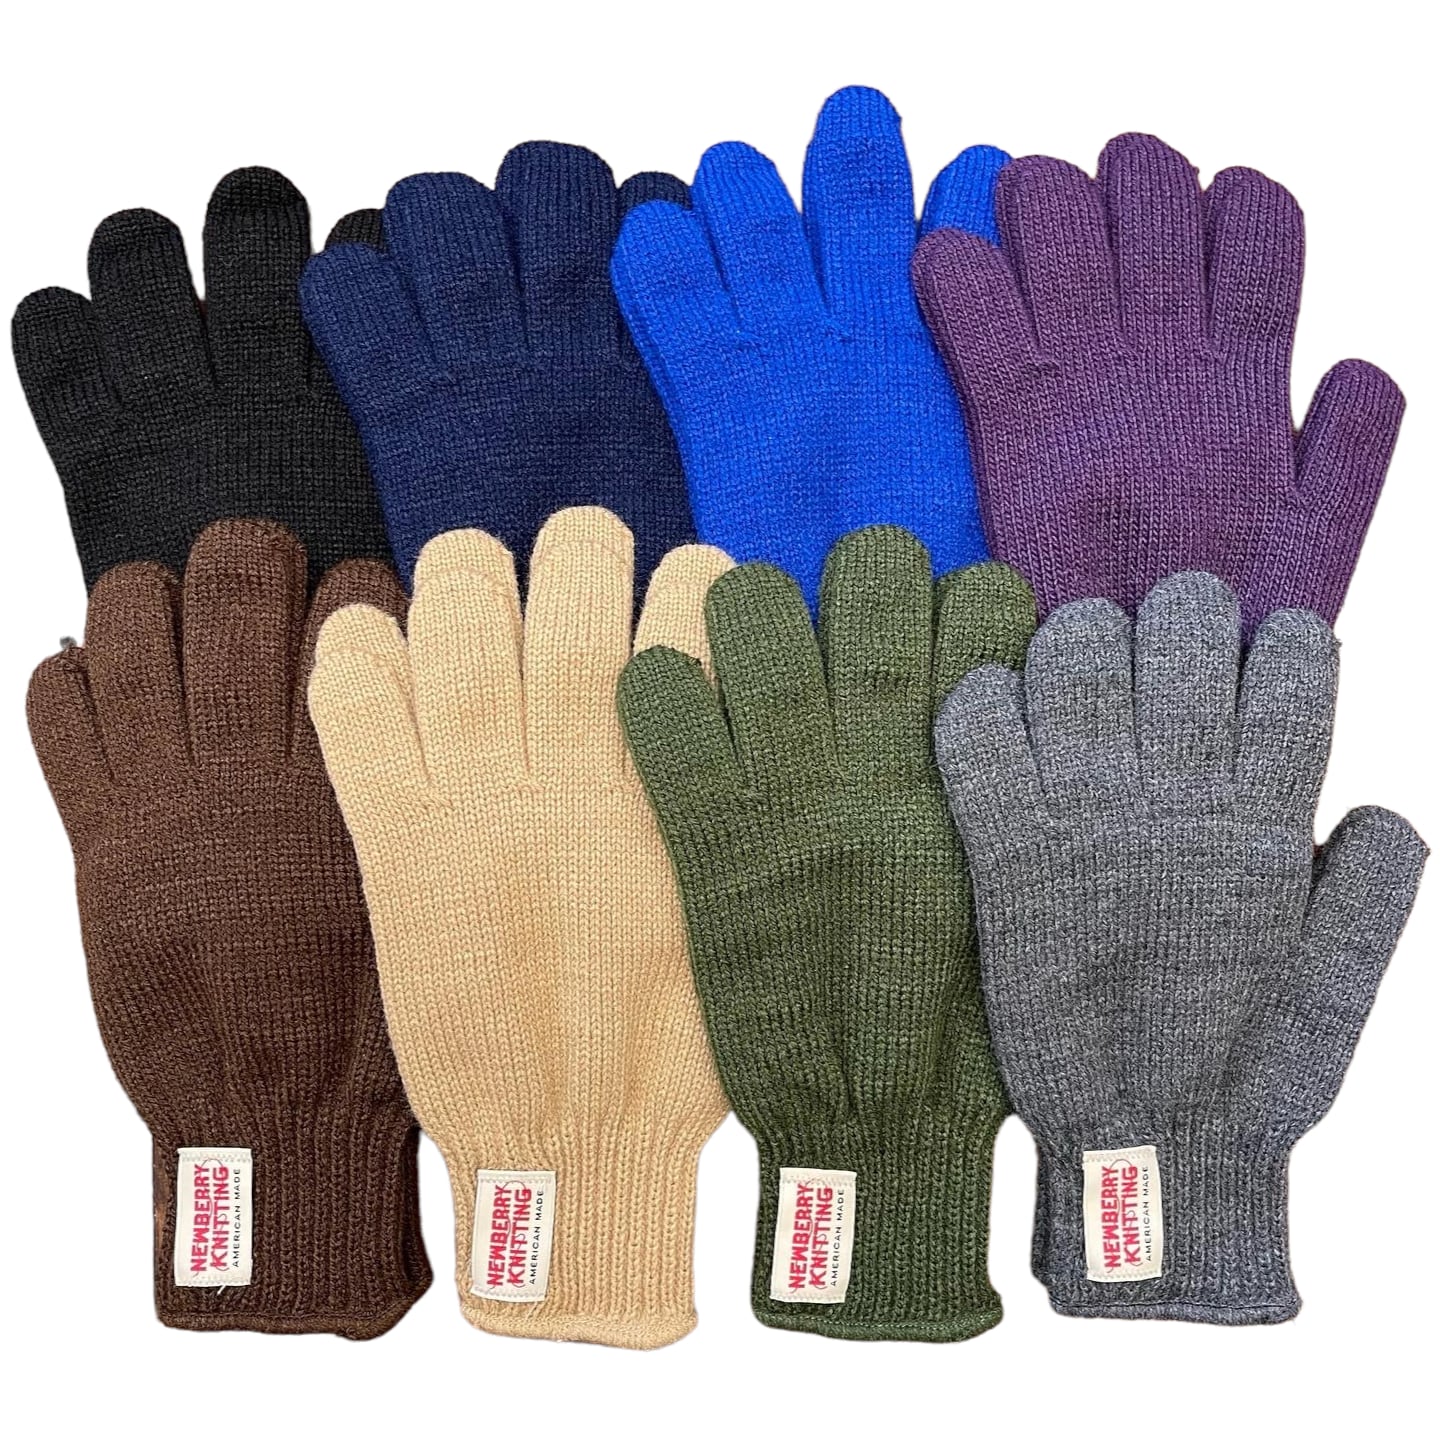 NEWBERRY KNITTING Short knit gloves made in USA